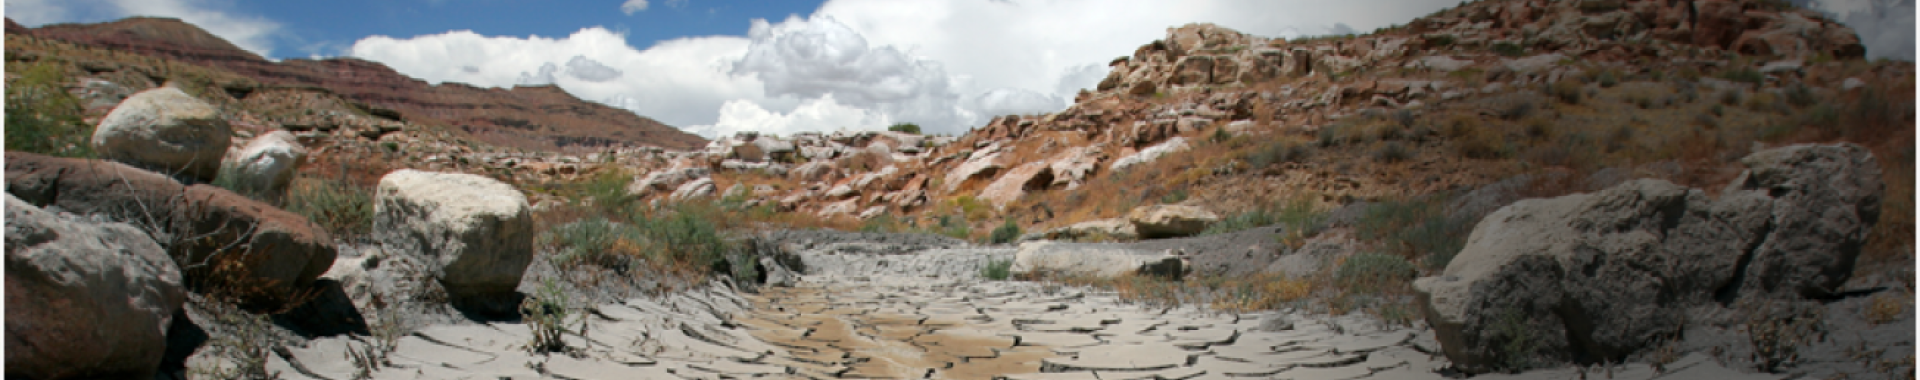 Dry riverbed in the desert.